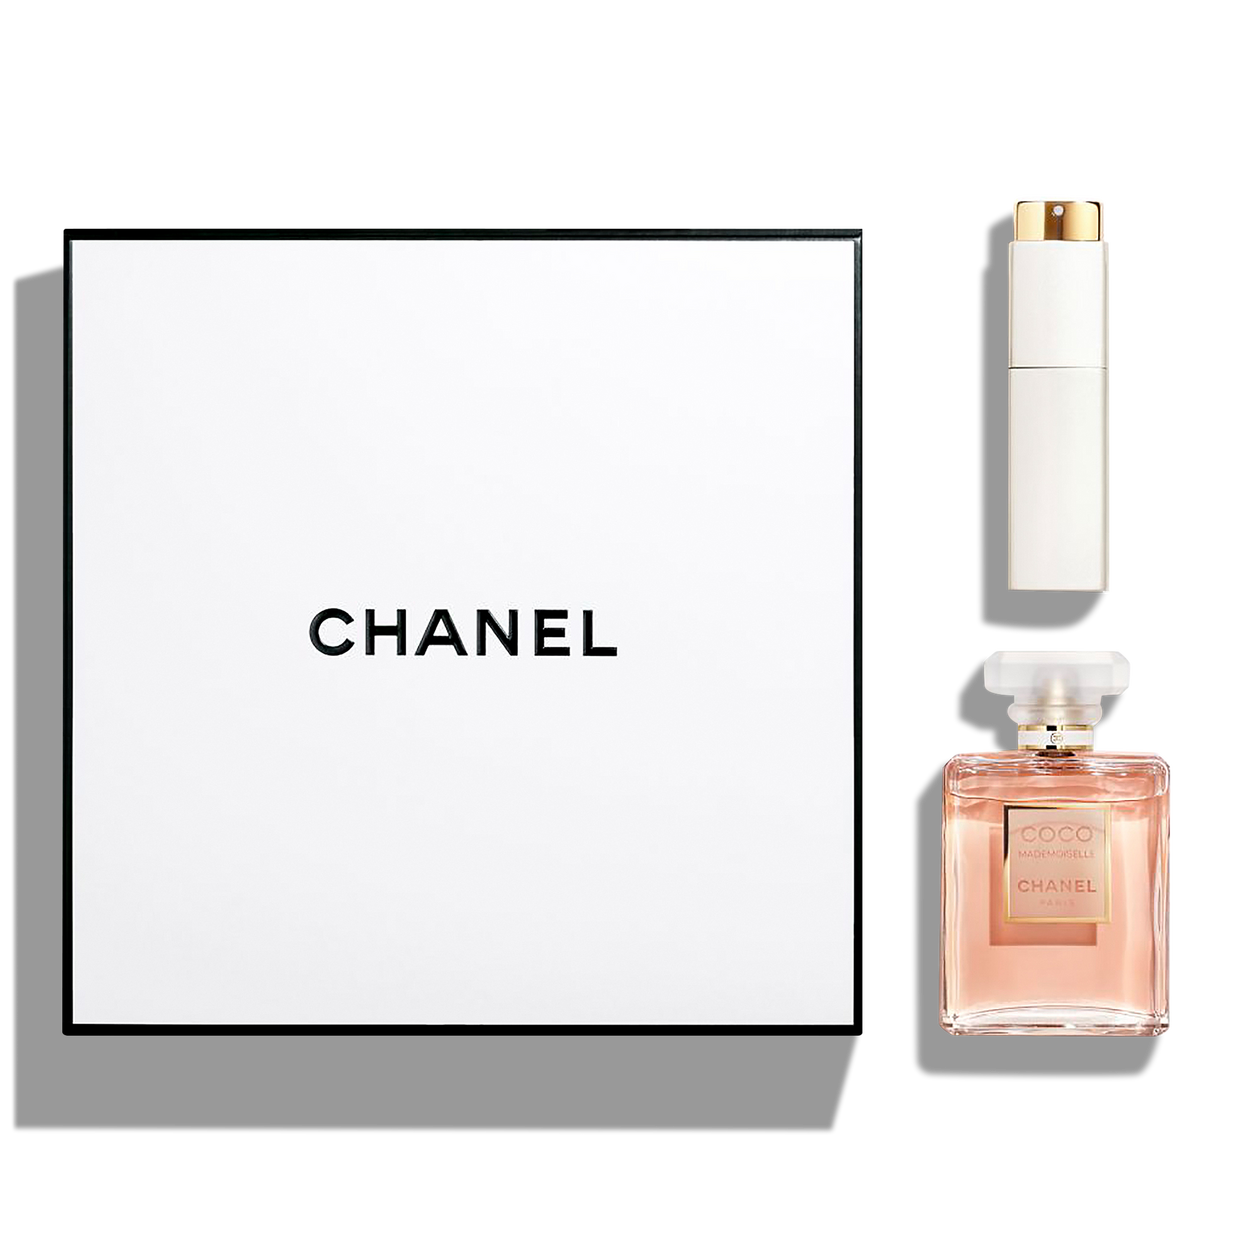 chanel bath and body gift sets